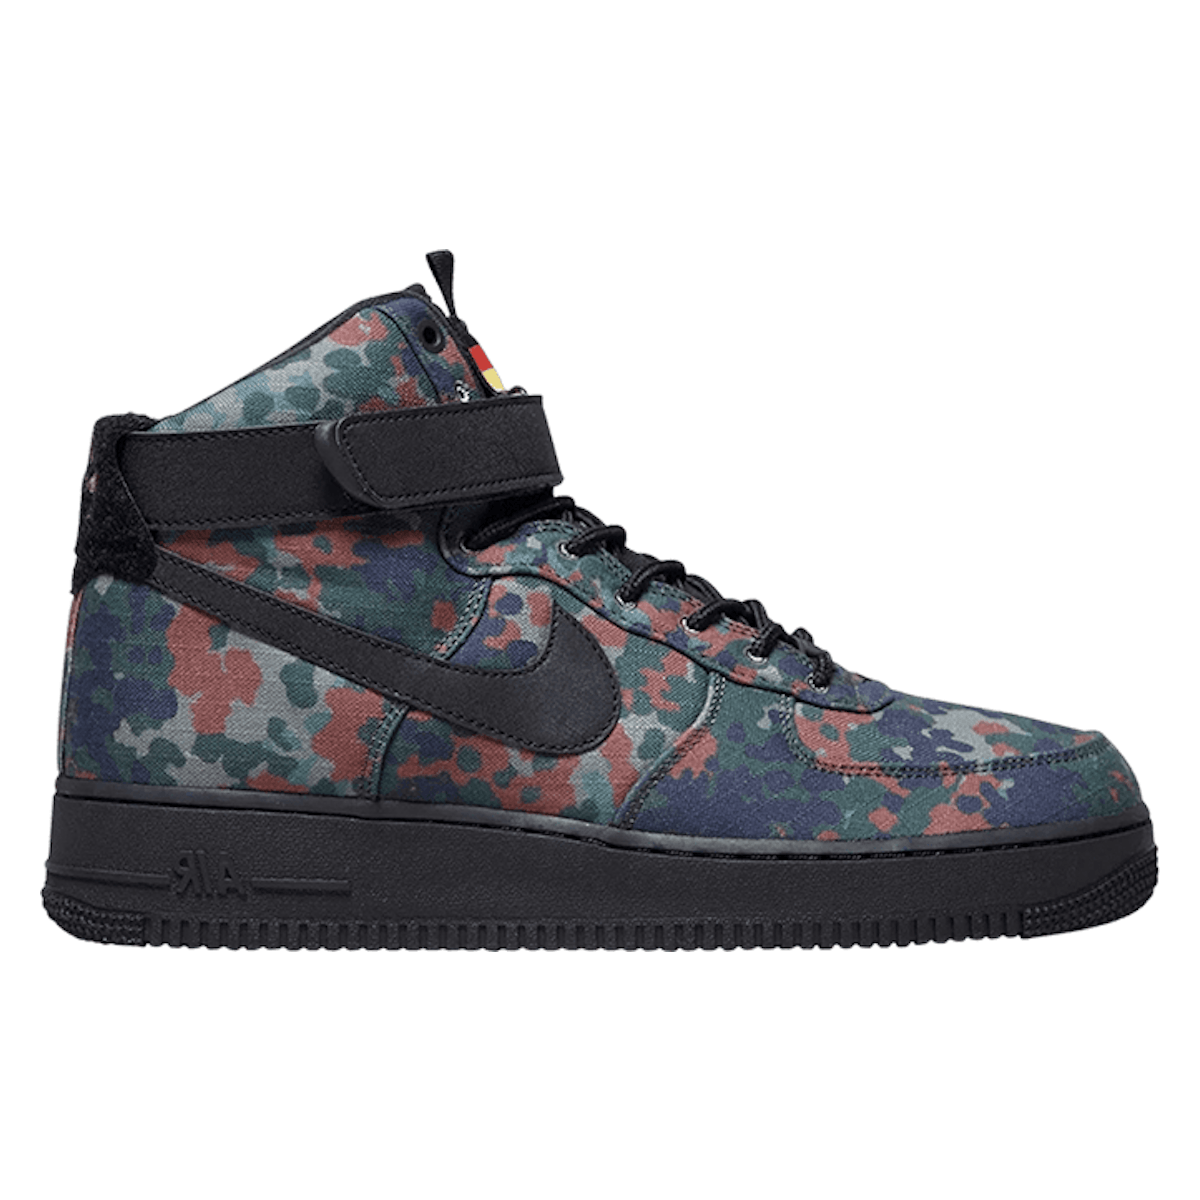 Nike Air Force 1 High '07 LV8 Country Camo Germany